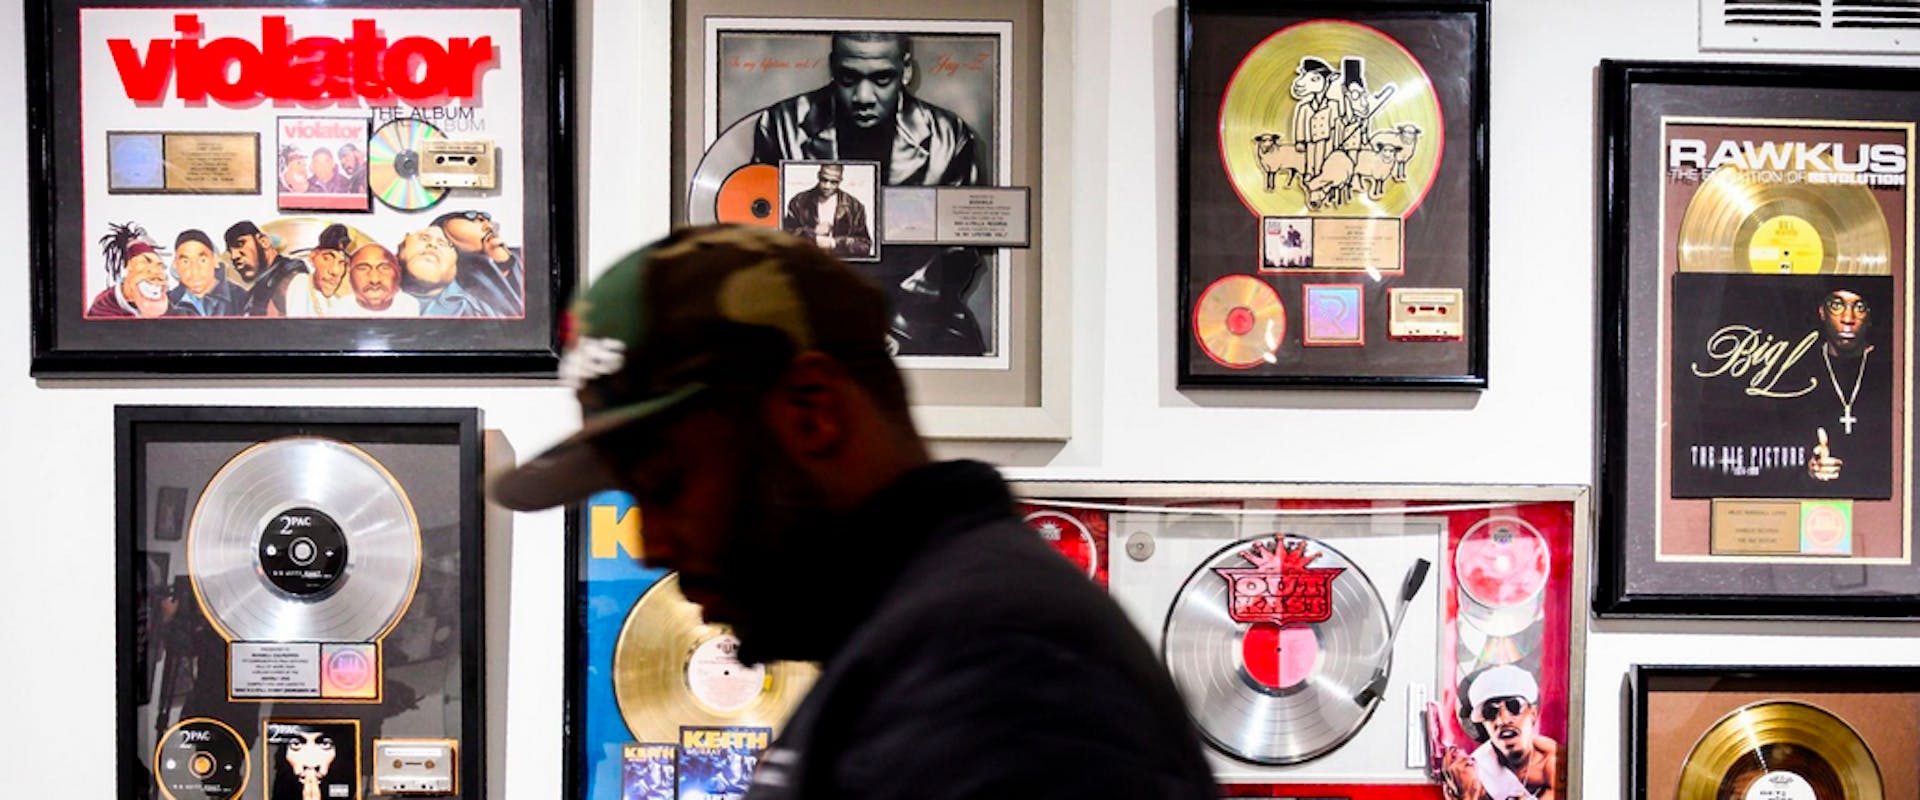 Guests look at memorabilia at the Hip-Hop Museum Pop Up Experience in Washington, DC on January 19, 2019. - The month long celebration of Hip-Hop began with live performances by the Sugarhill Gang, Melle Mel, and Grandmaster Caz, who were all signed to Sugarhill Records in the early 1980s. The interactive experience is expected to give fans an opportunity to understand how the music of urban culture has impacted the world.